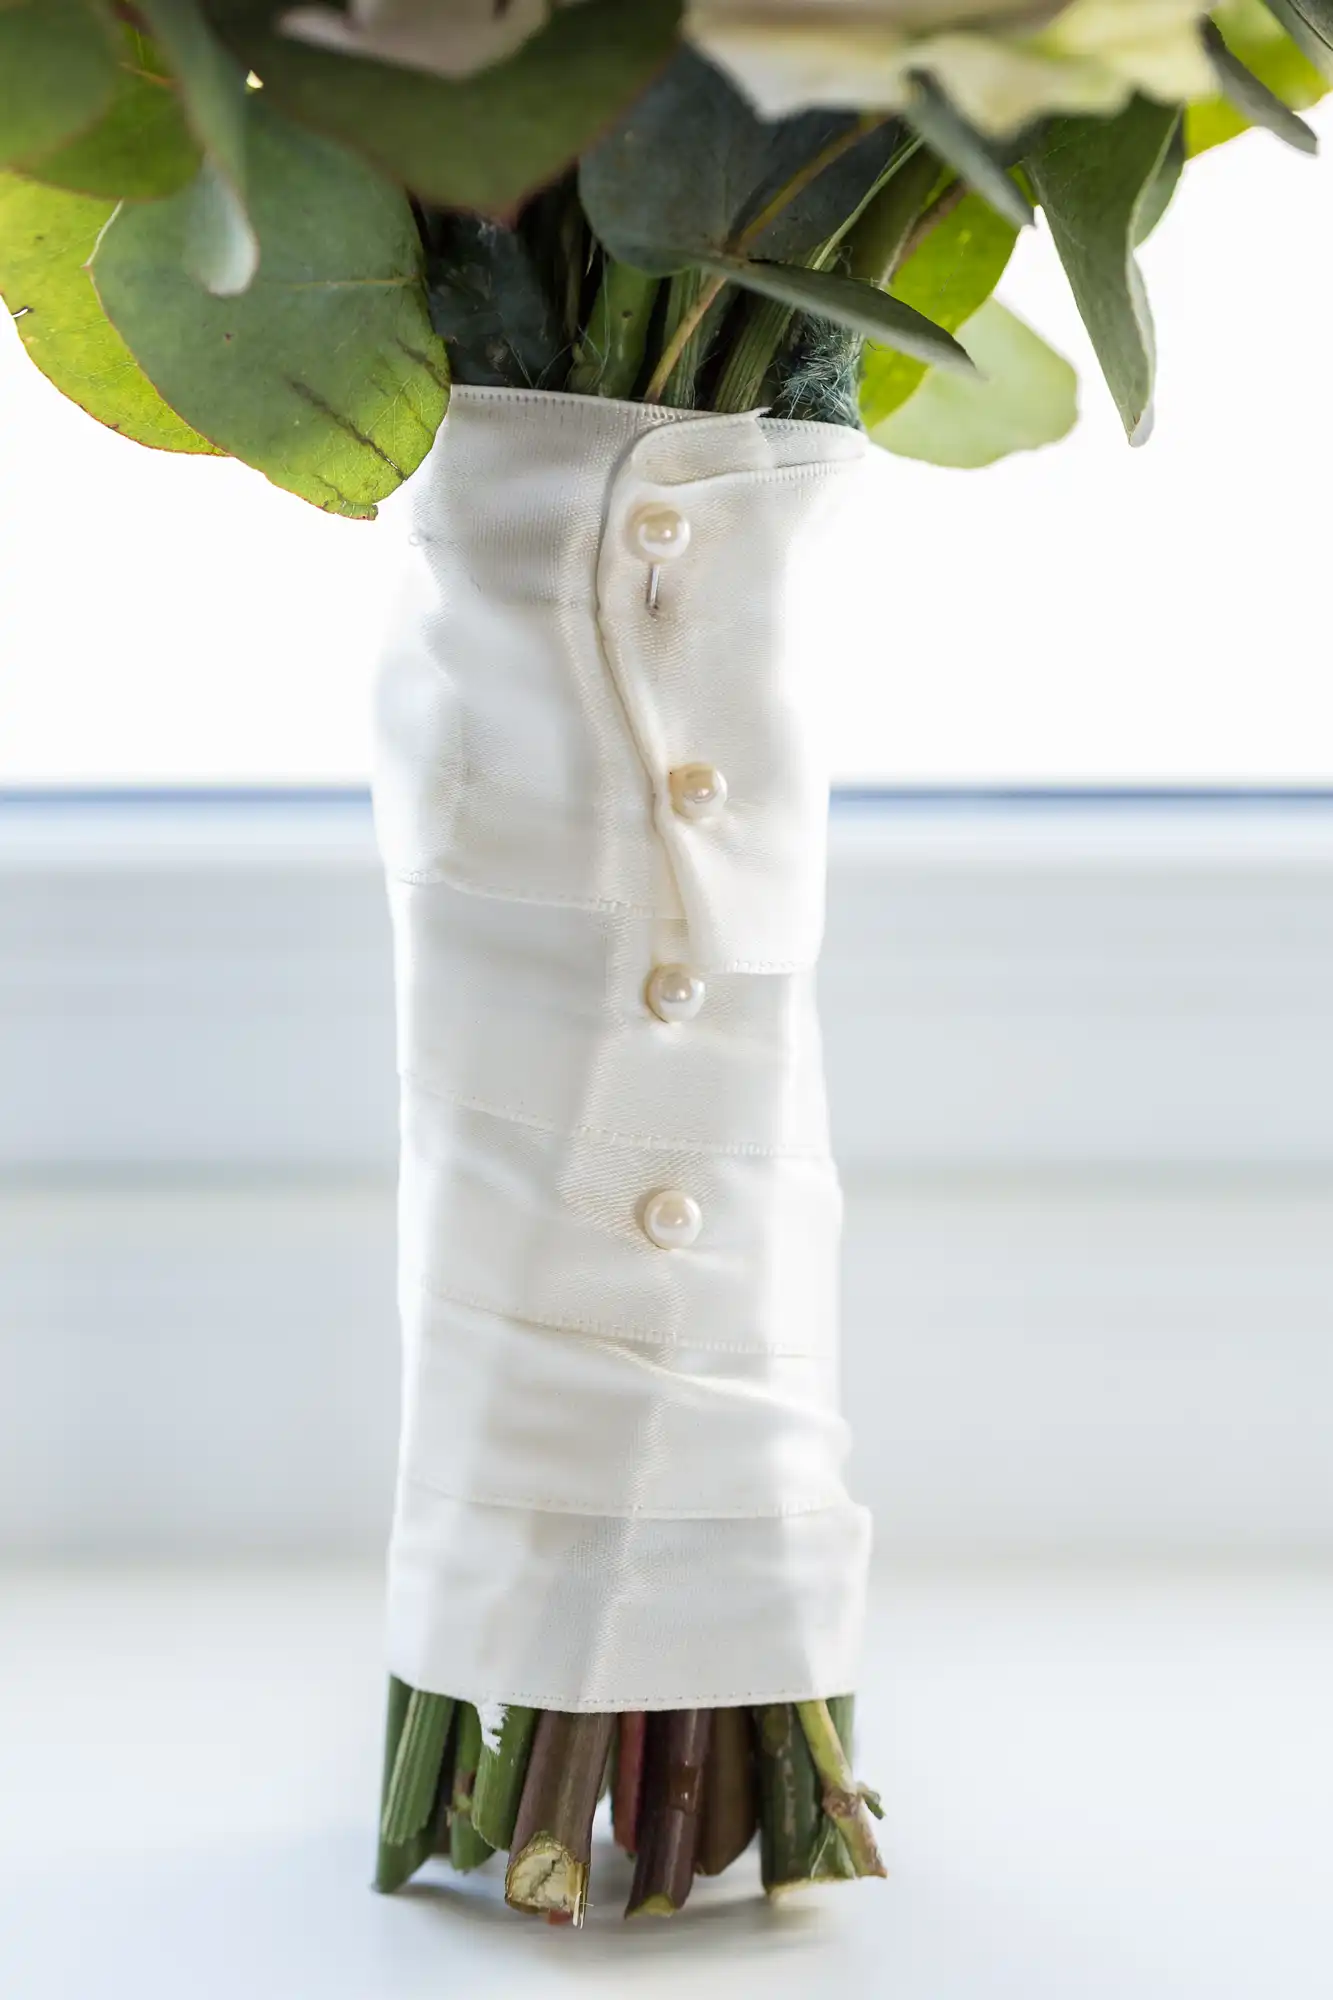 A bouquet of flowers wrapped in white fabric secured with buttons, placed against a bright background.